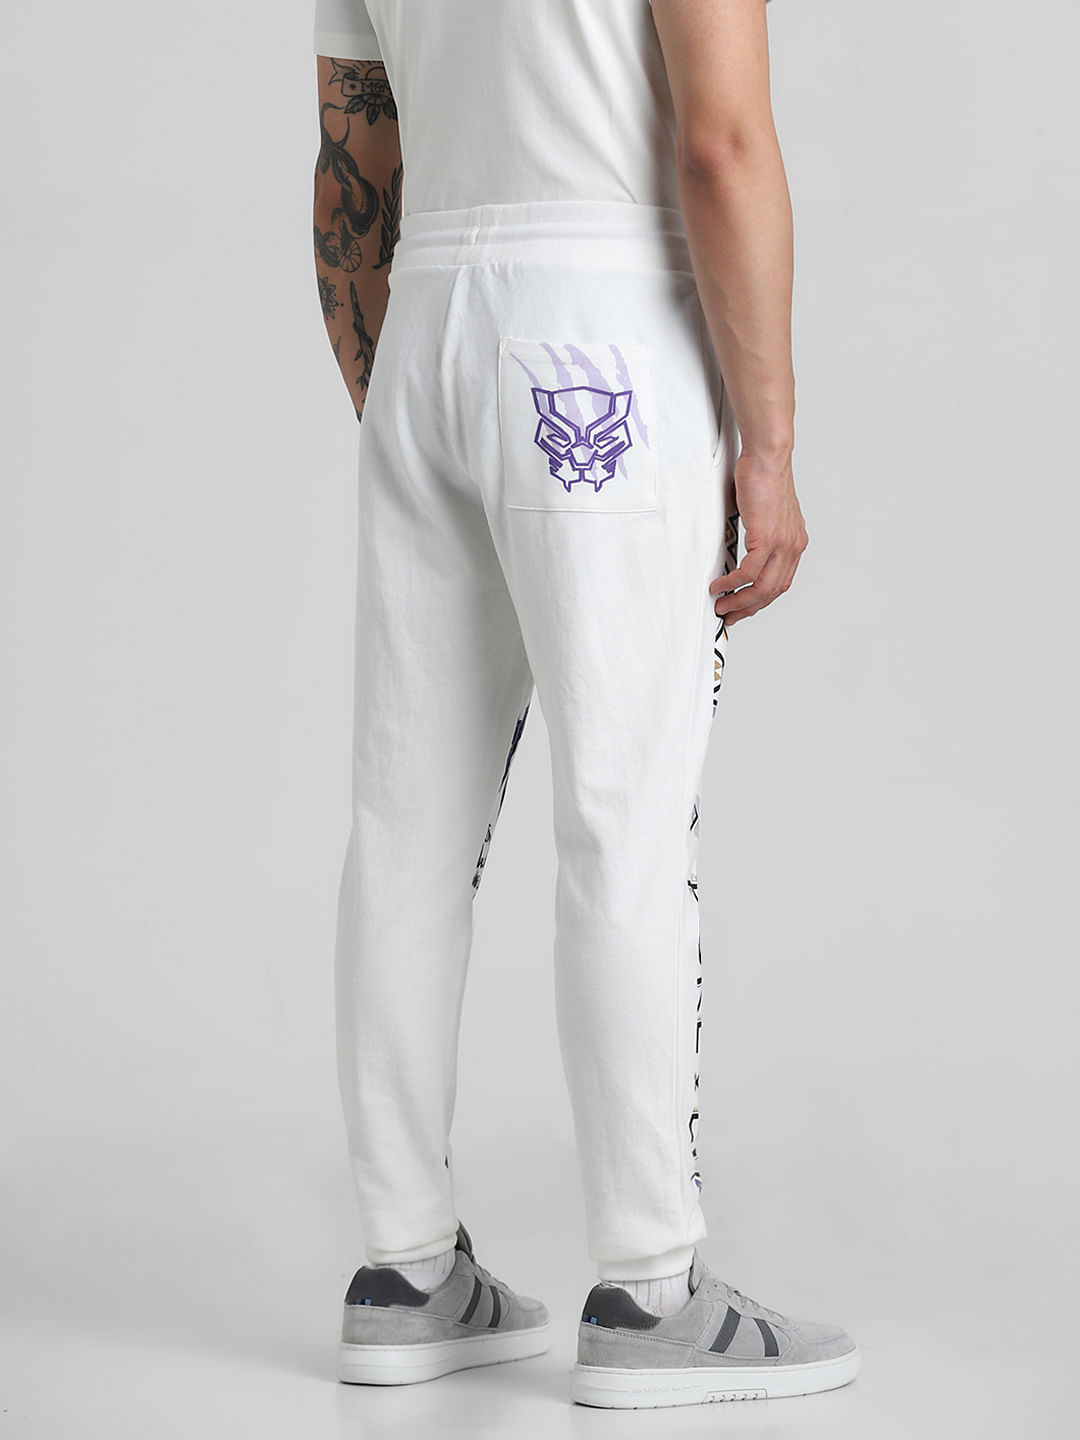 Buy YI Mens self Design Track Pants Lower Jogger for Gym  Yoga Wear with  Pockets White at Amazonin